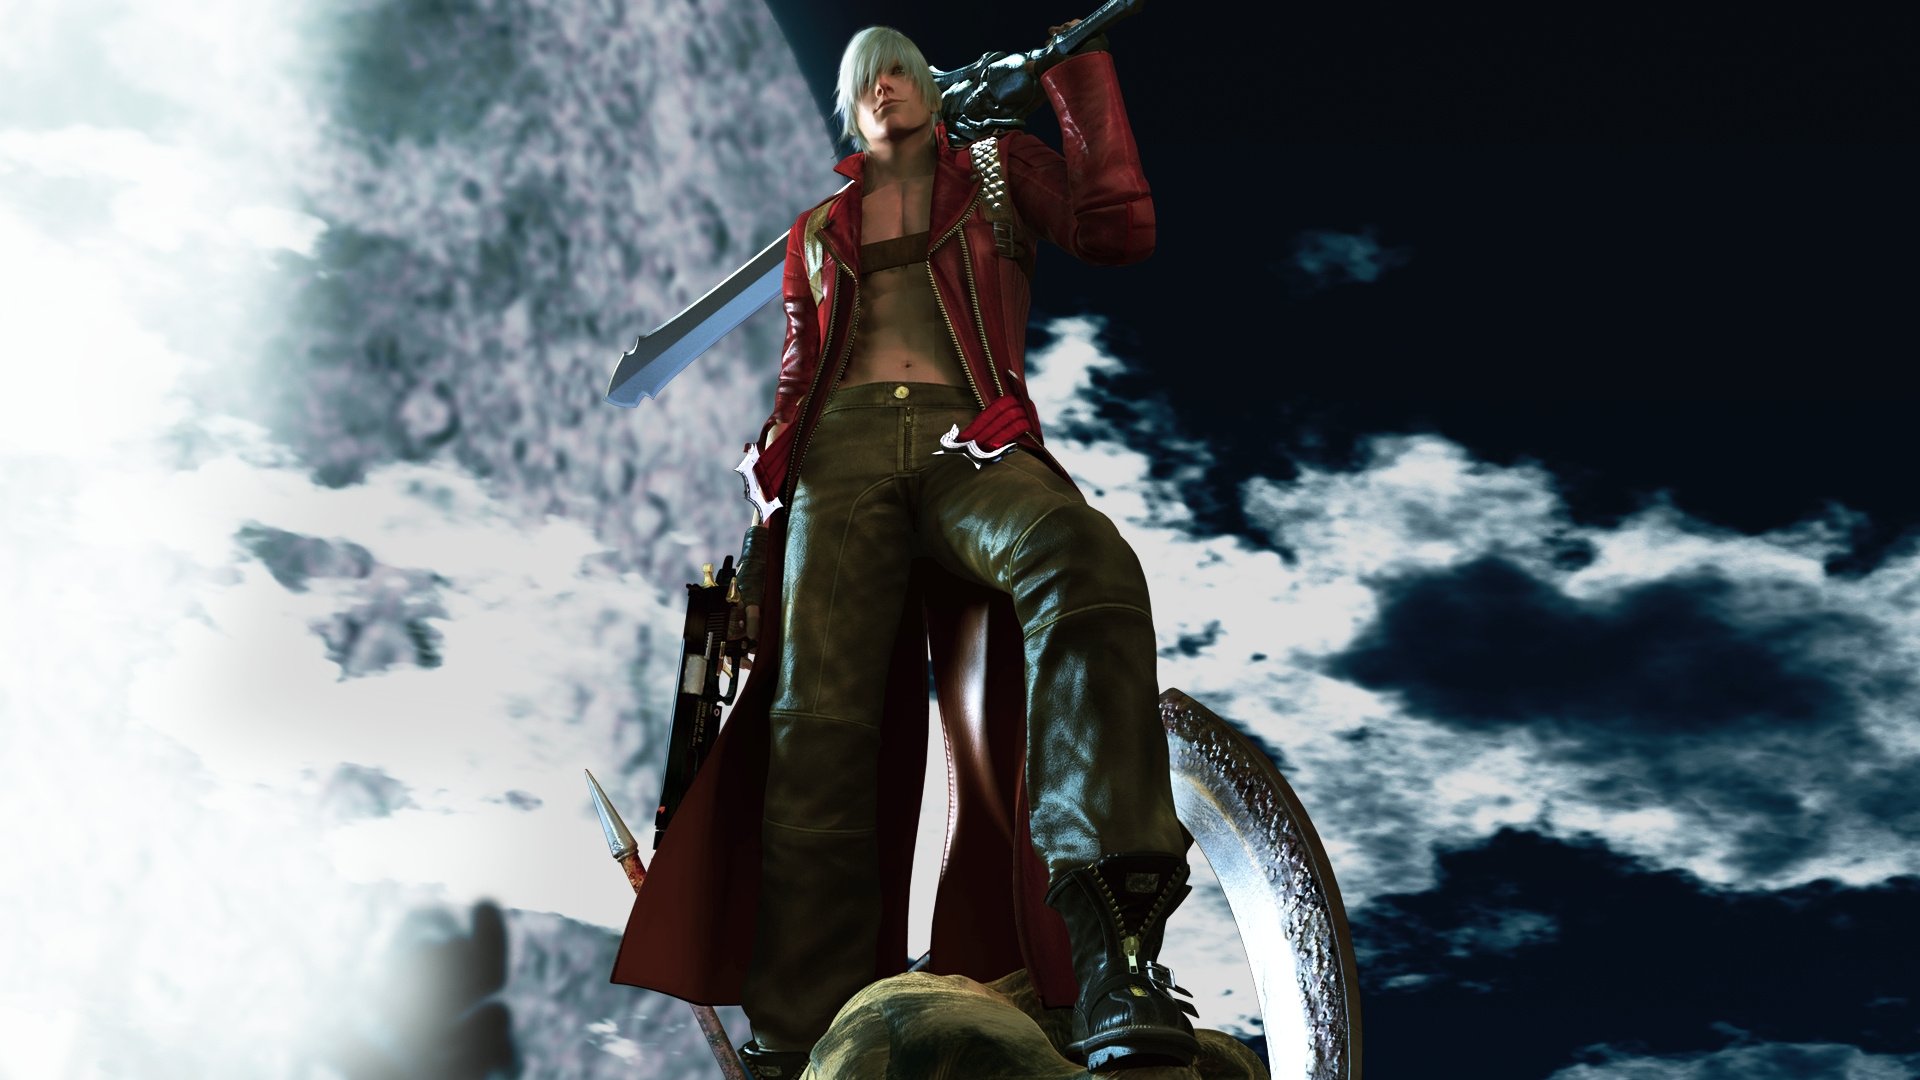 devil may cry hd switch